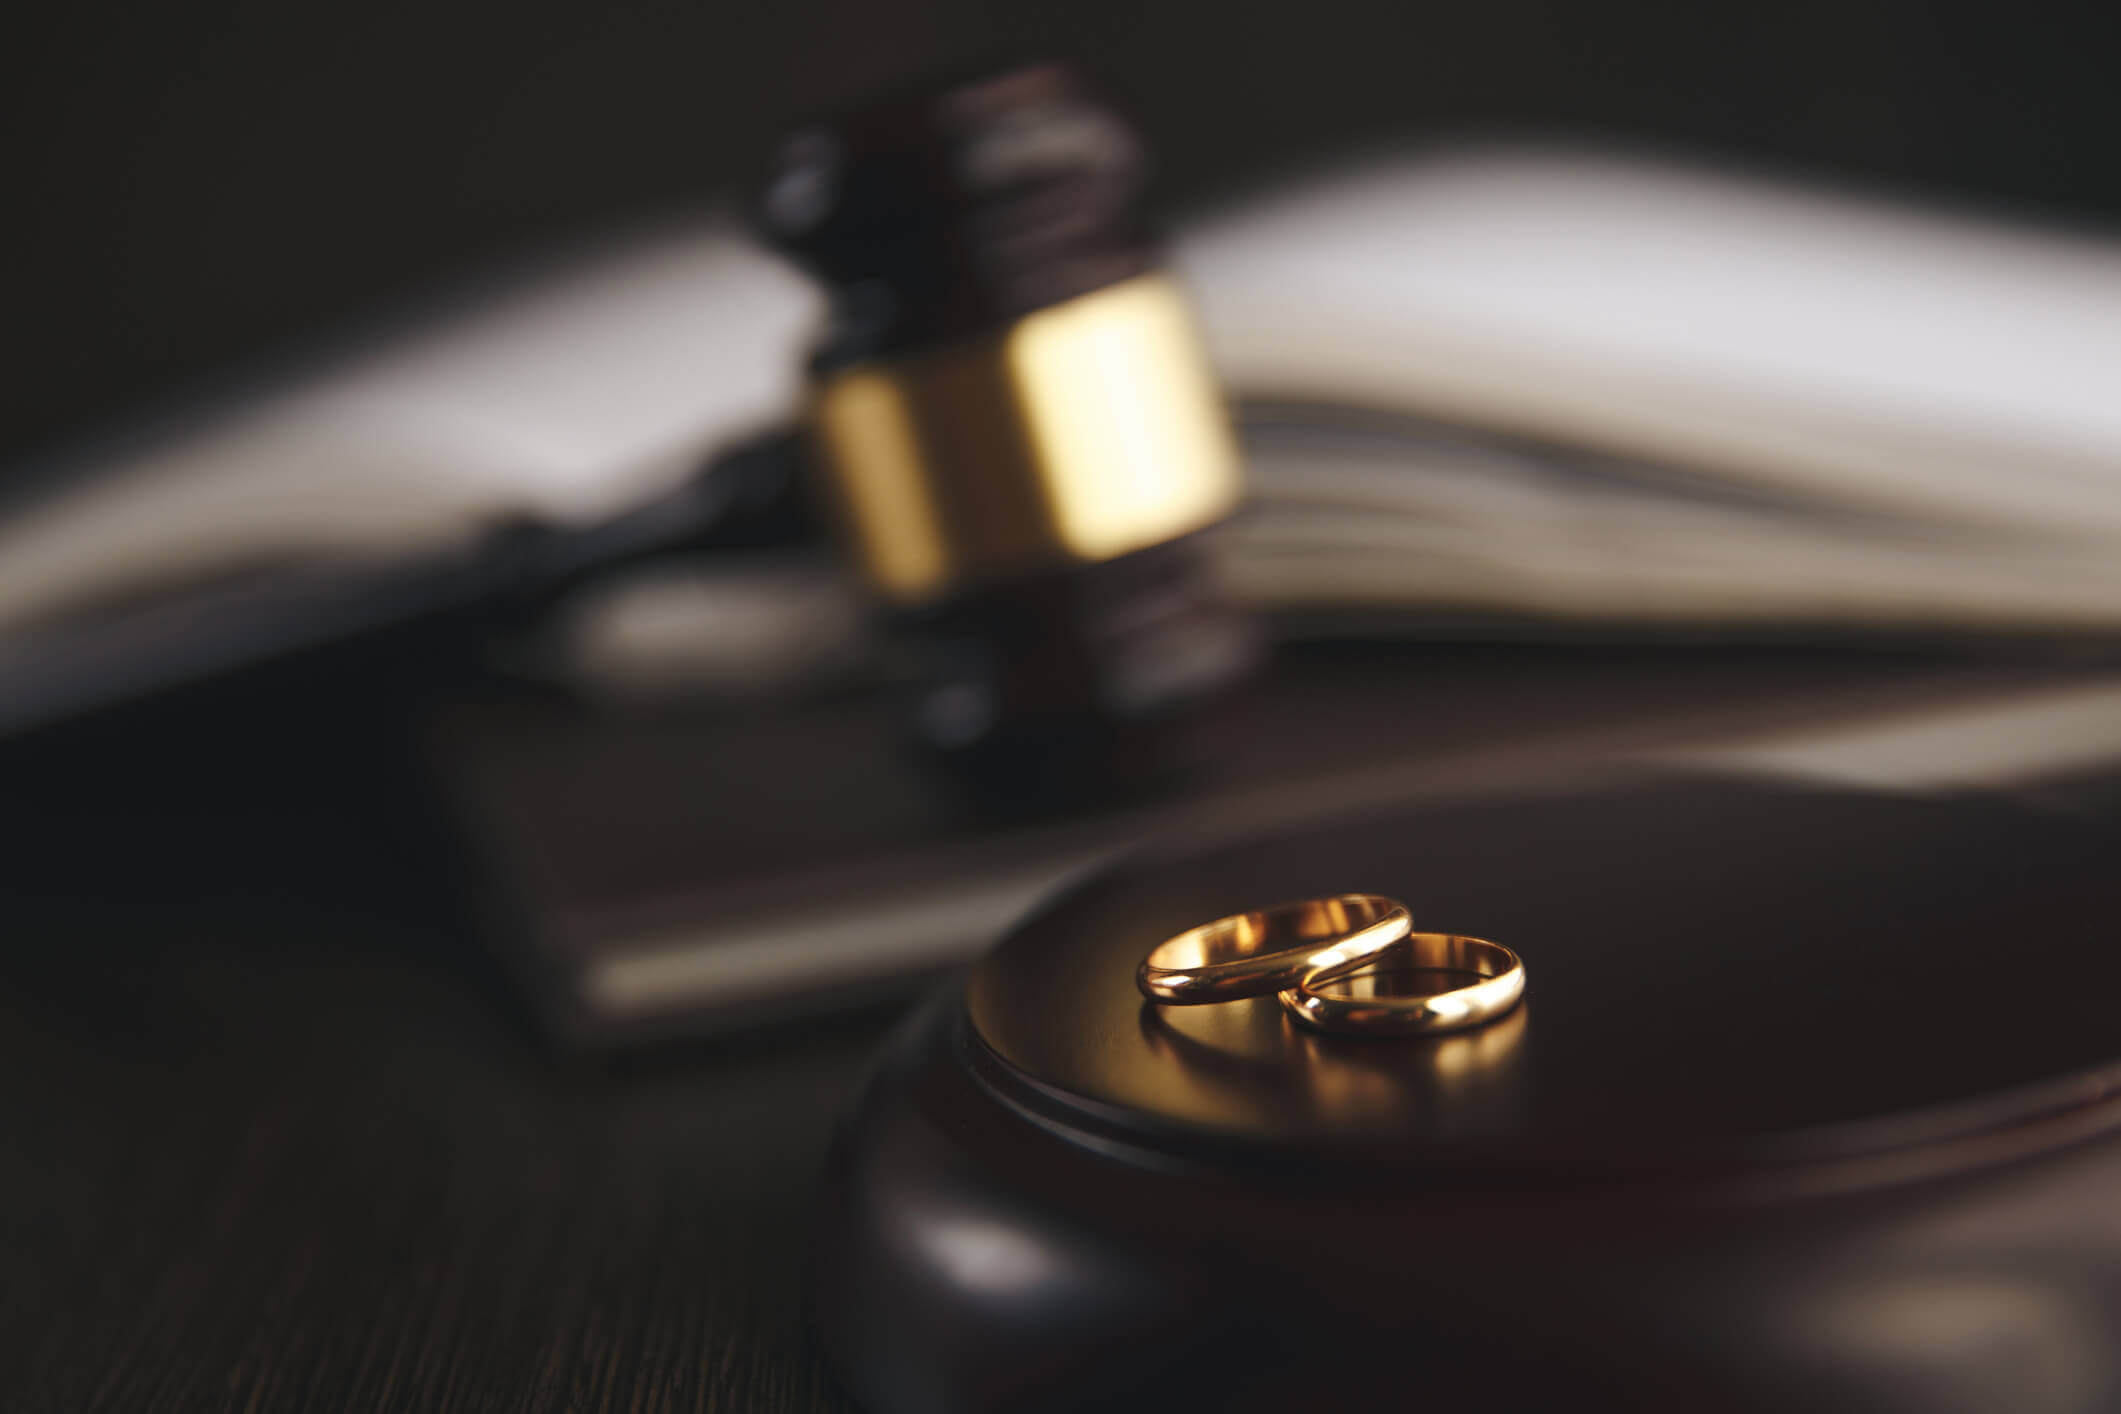 Two wedding rings separate on a desk, signifying divorce.